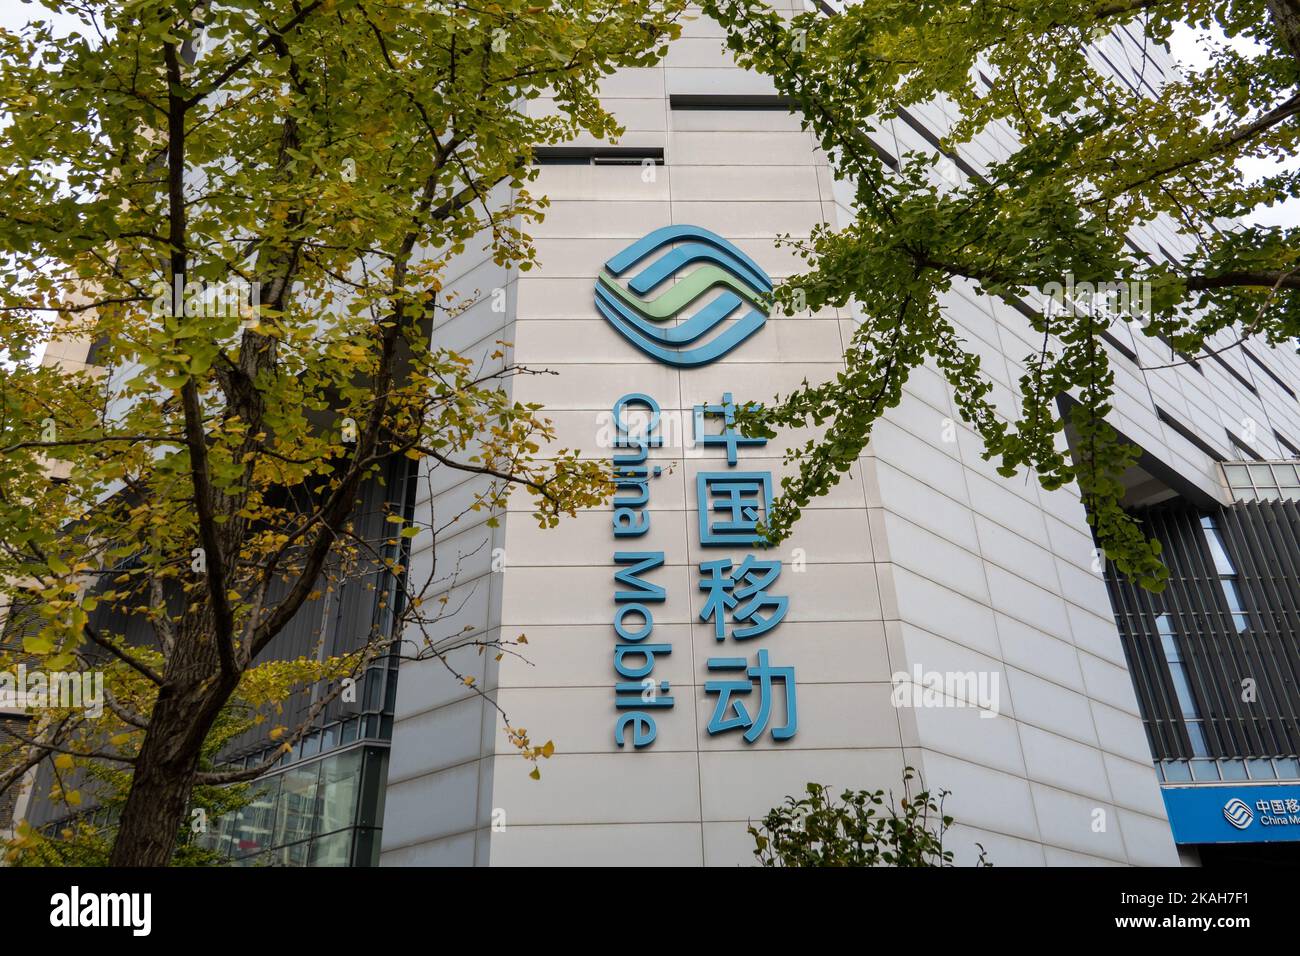 SHANGHAI, CHINA - NOVEMBER 3, 2022 - The China Mobile office building and company LOGO are seen on Pingliang Road in Yangpu district in Shanghai, Chin Stock Photo